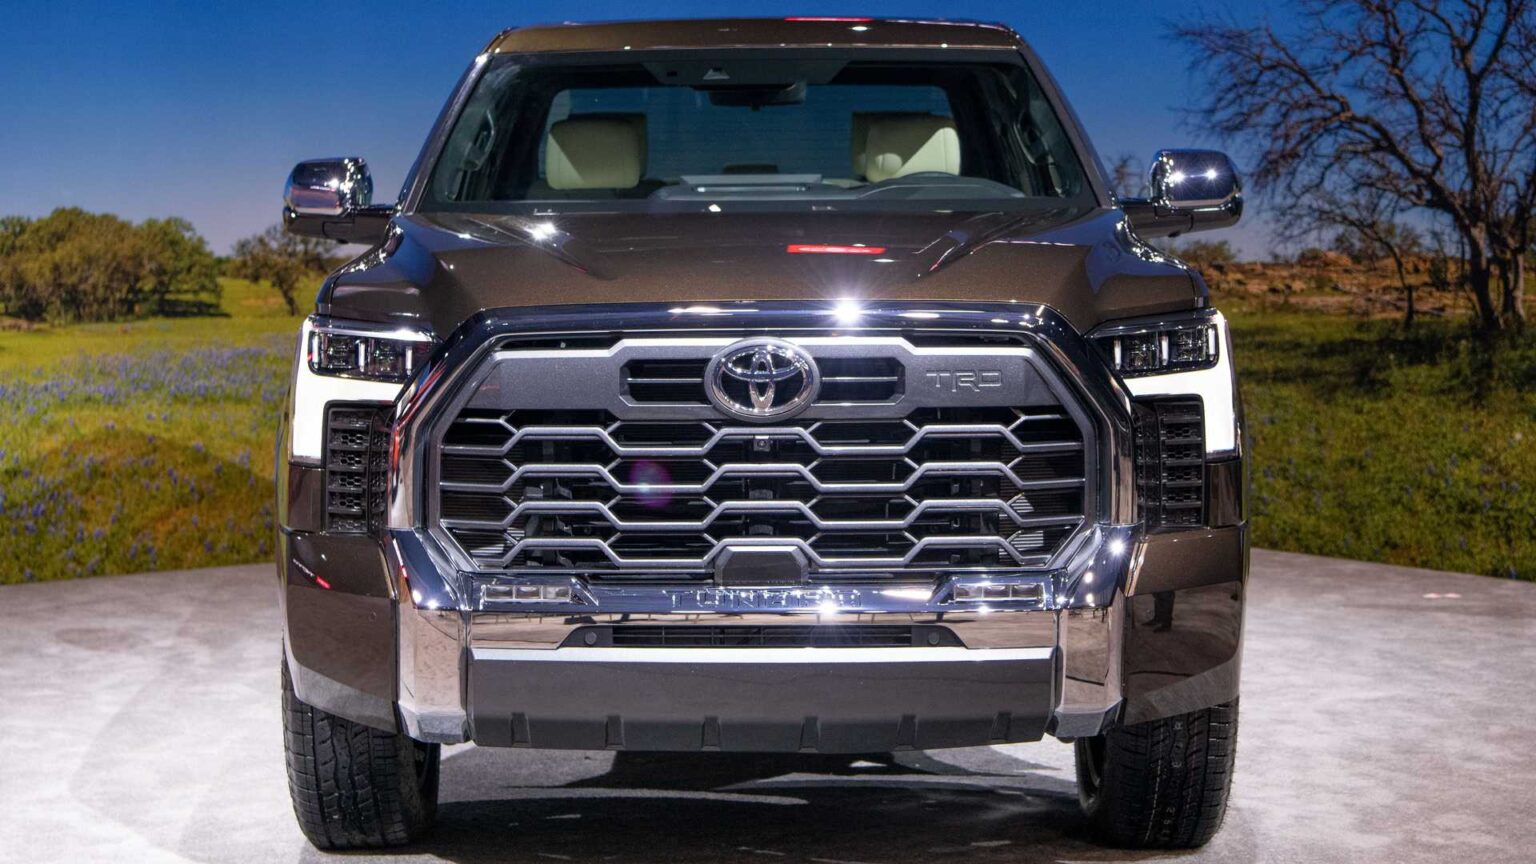 2022-toyota-tundra-1794-edition-exterior-front-view-1536x864.jpg